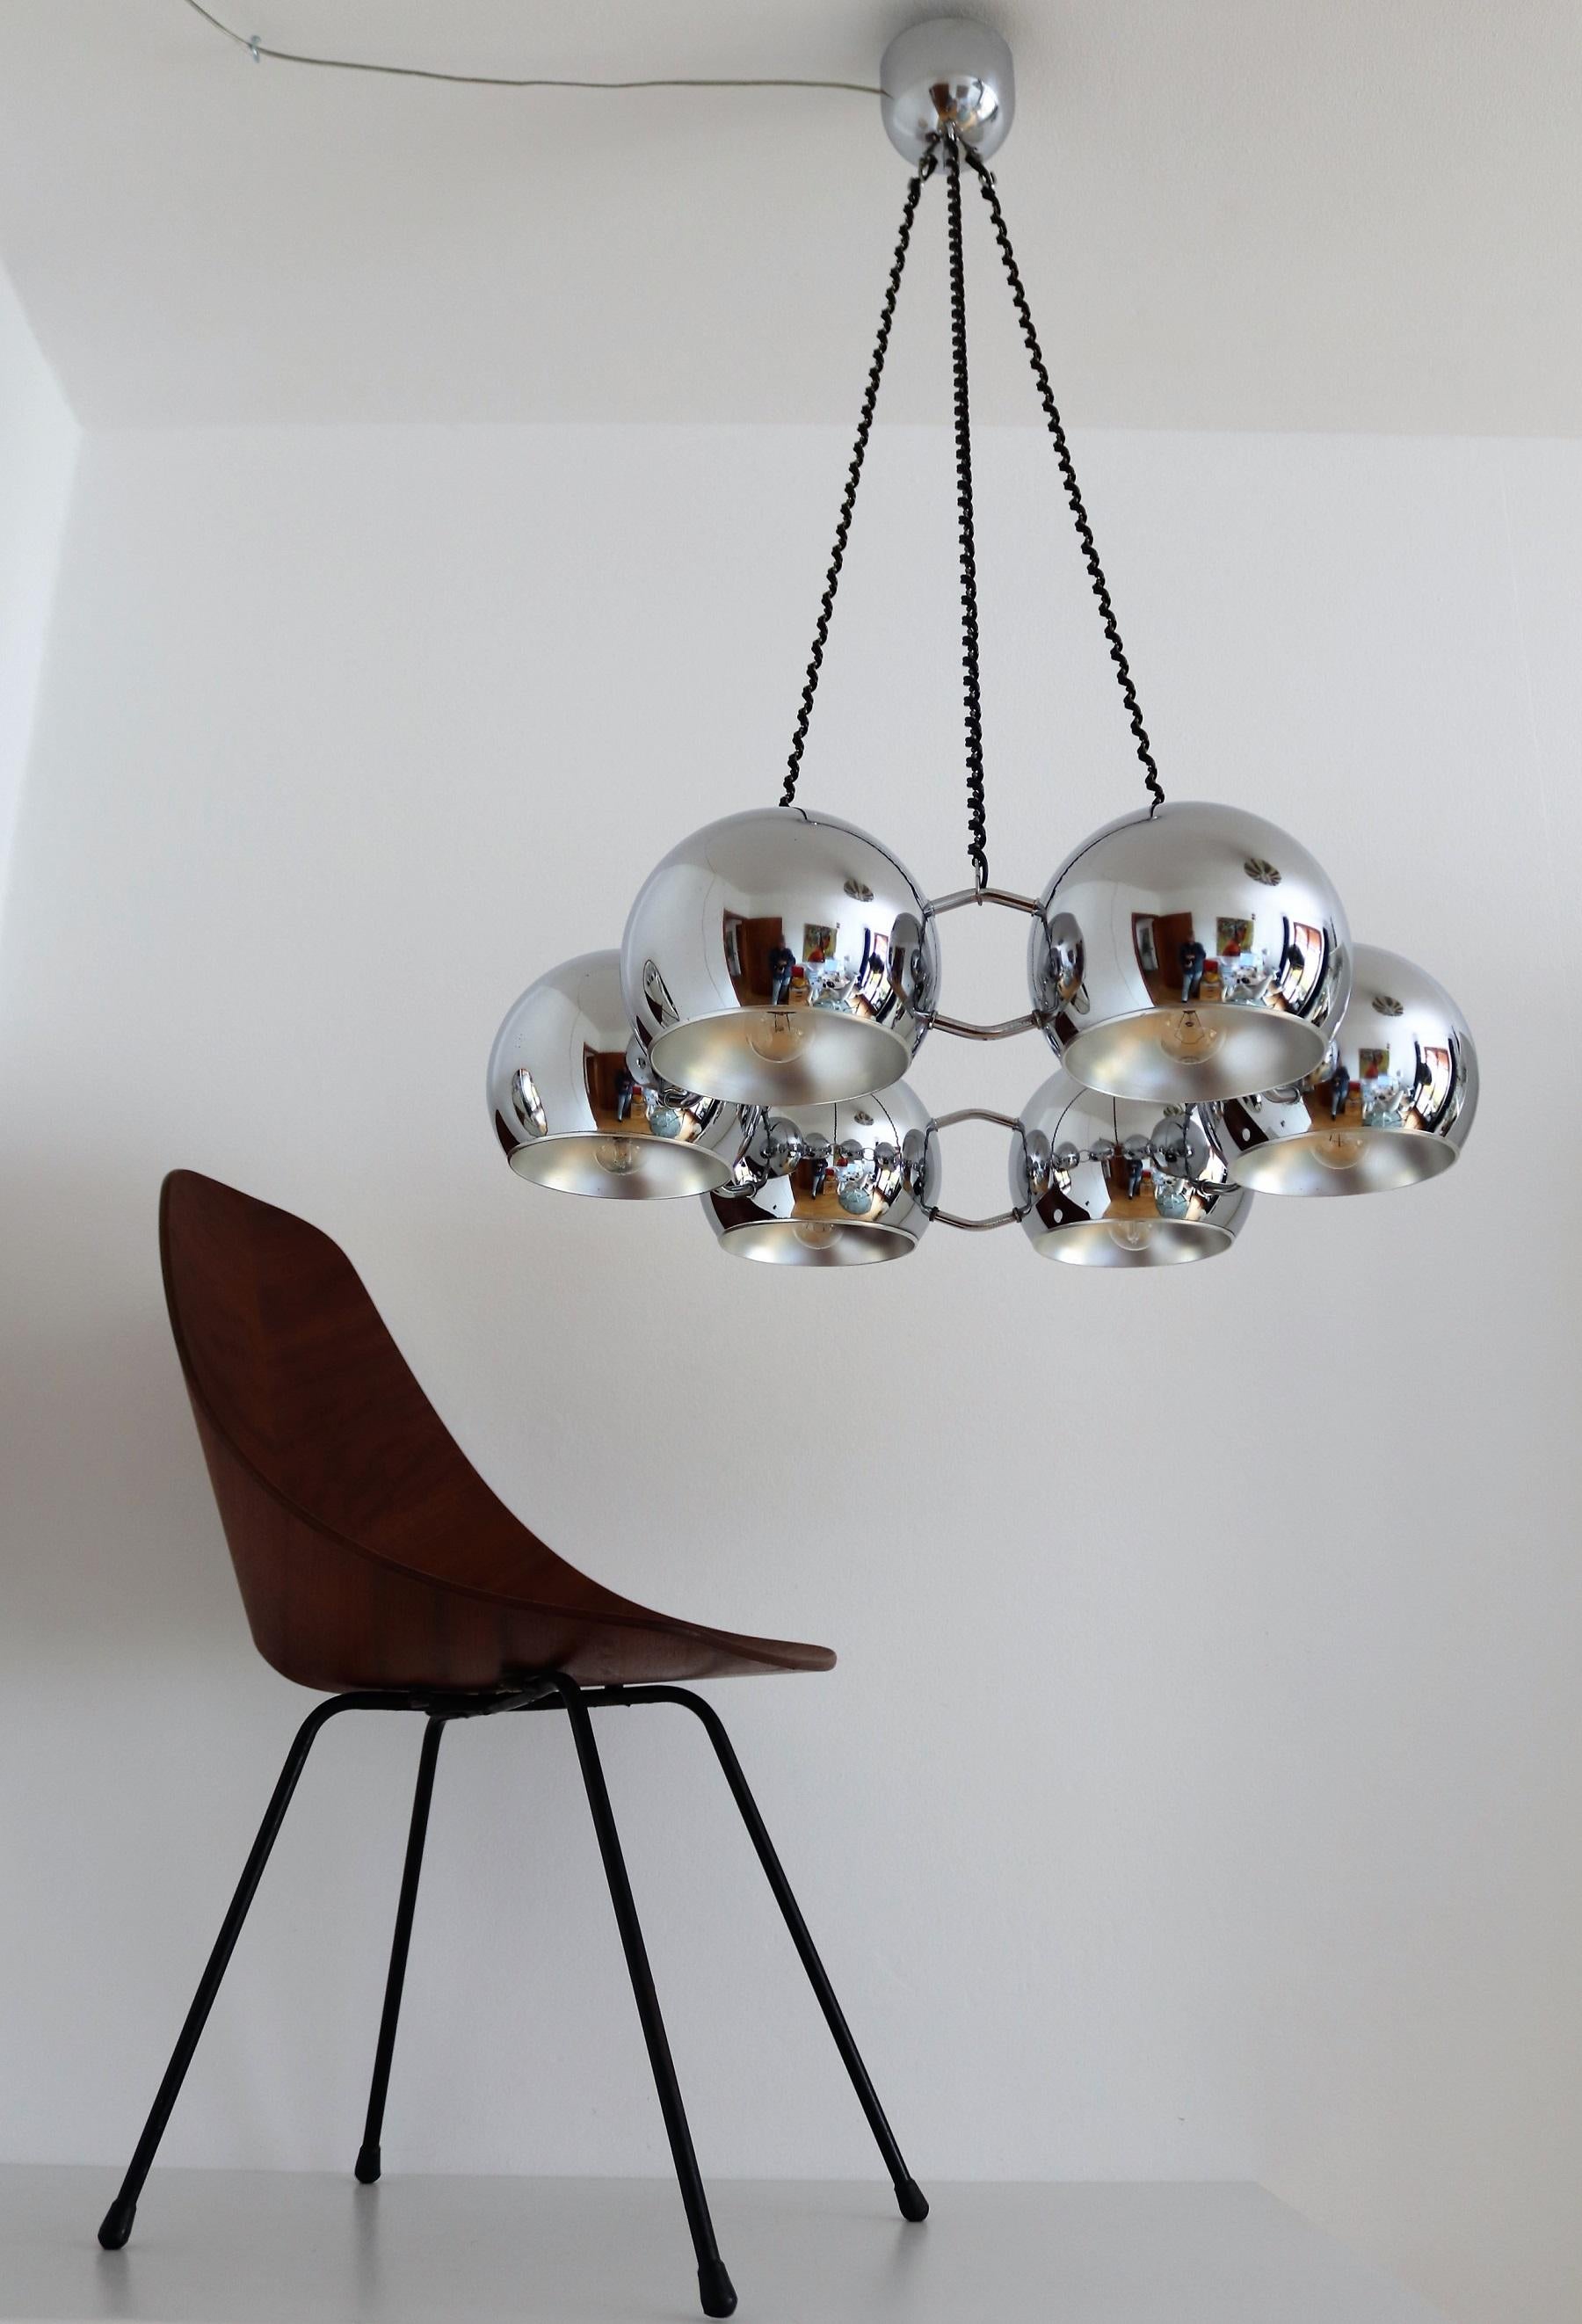 Gorgeous chandelier made in the Space Age style by Reggiani, Italy, in the 1970s.
The 6 chrome-plated spheres of light are firmly connected to each other and create a beautiful circle of light. Particularly effective above a round dining